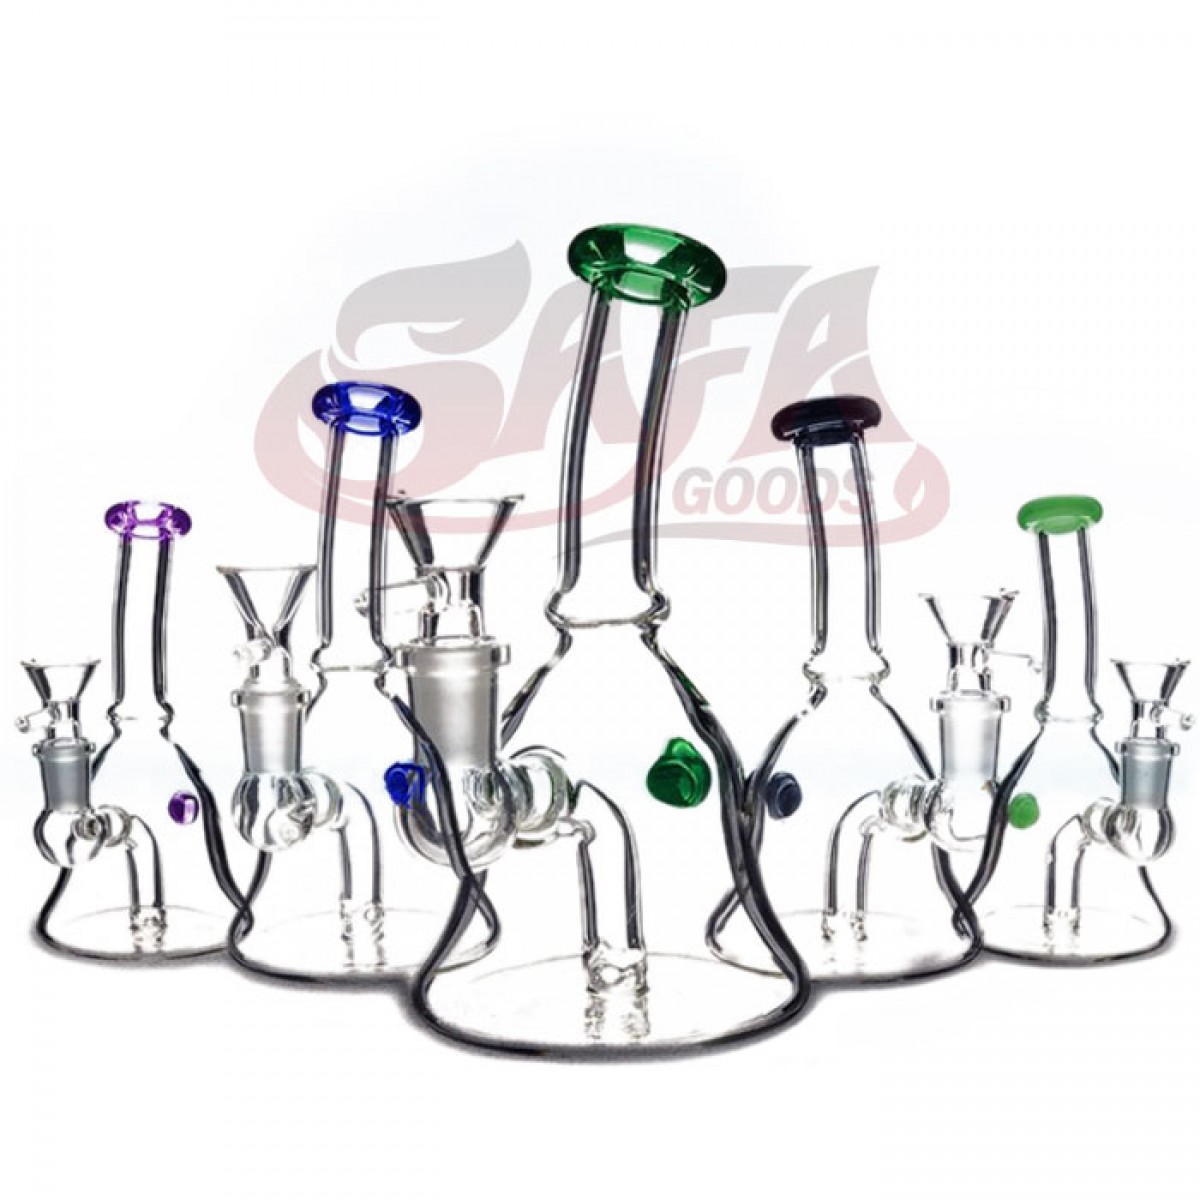 6 Inch Glass Banger Hanger Water Pipes